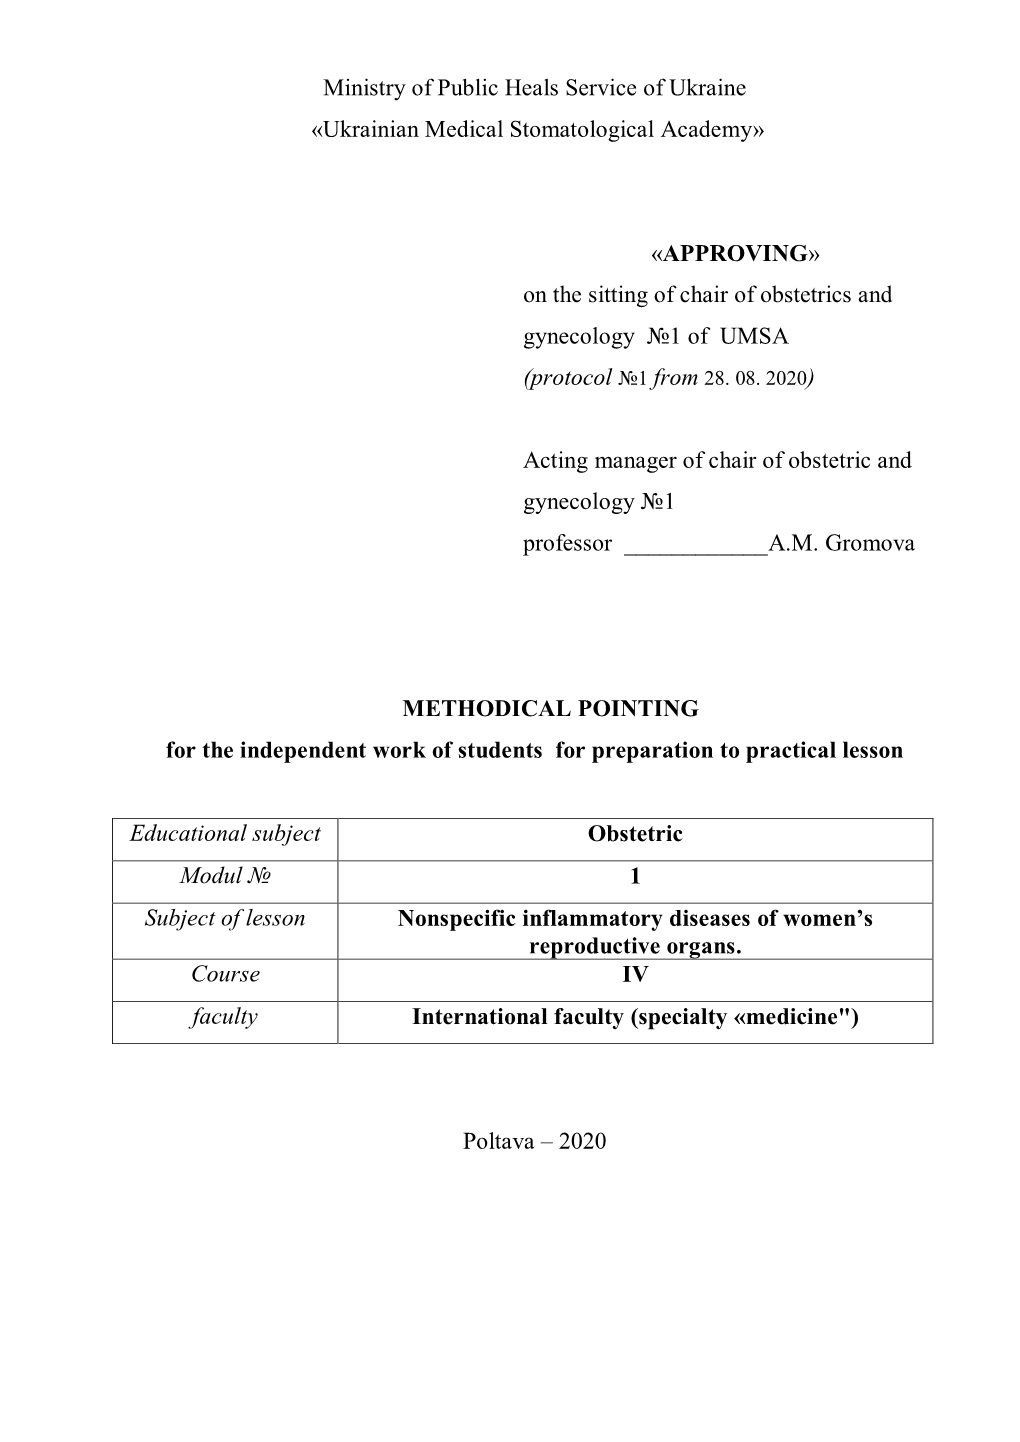 APPROVING» on the Sitting of Chair of Obstetrics and Gynecology №1 of UMSA (Protocol №1 from 28